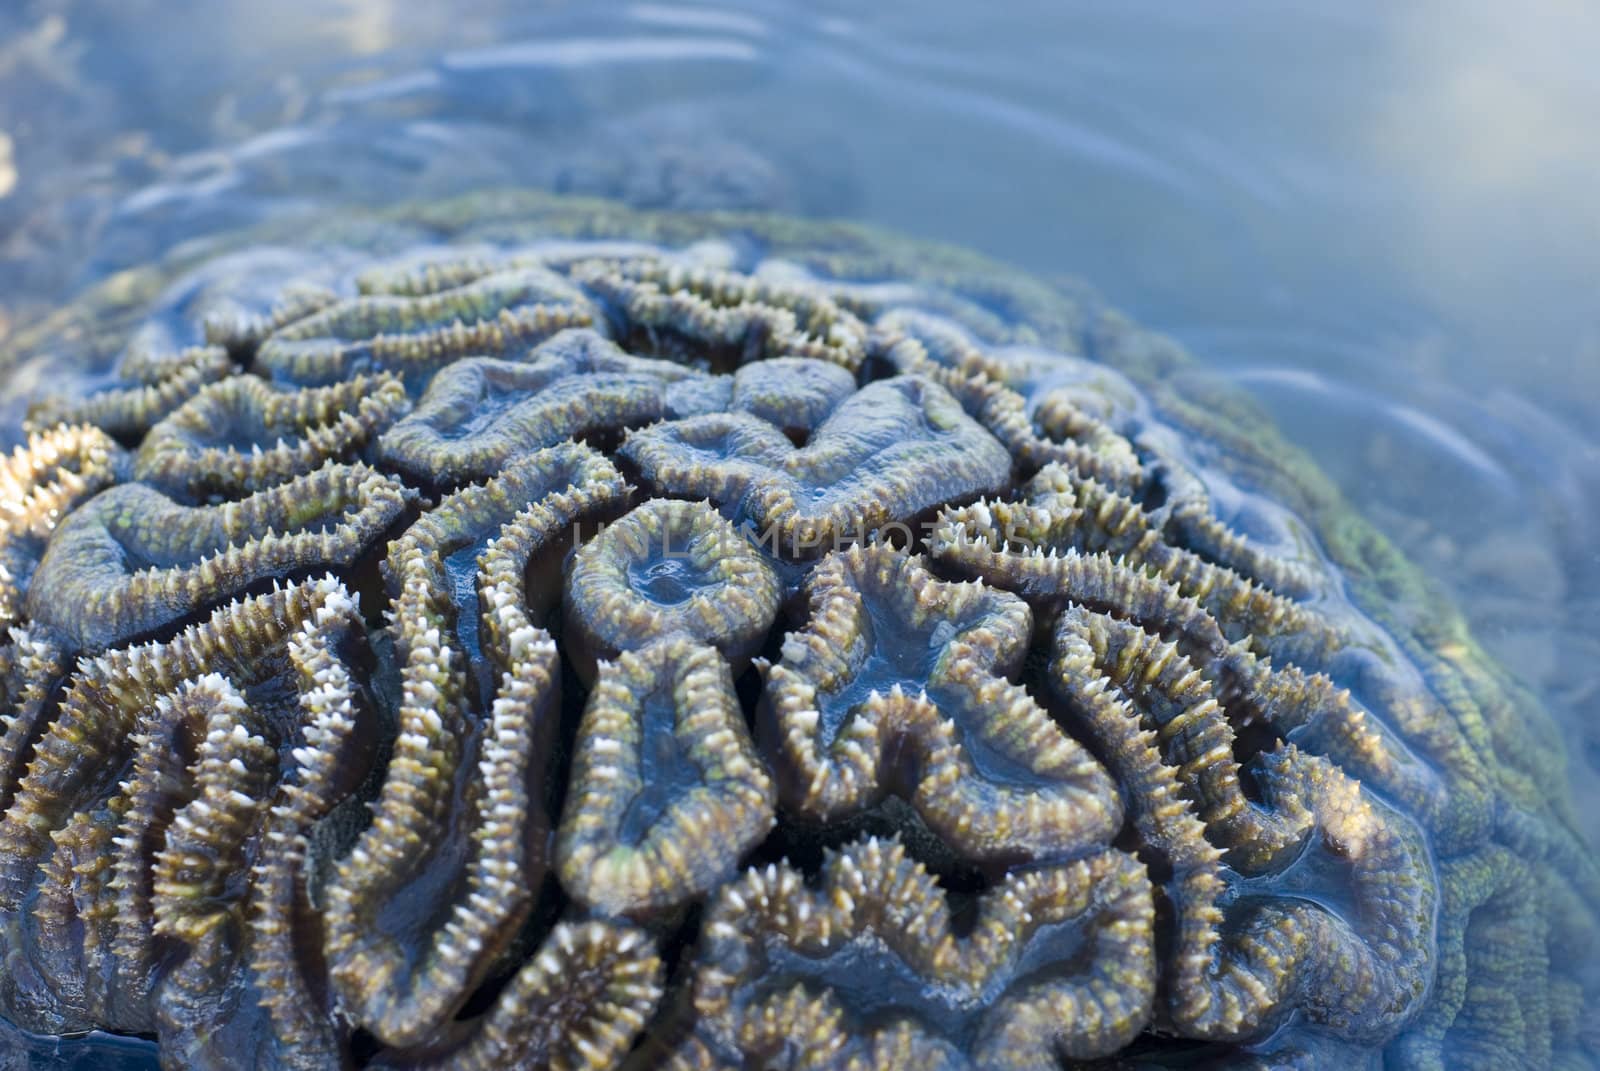 Brain coral by stockarch